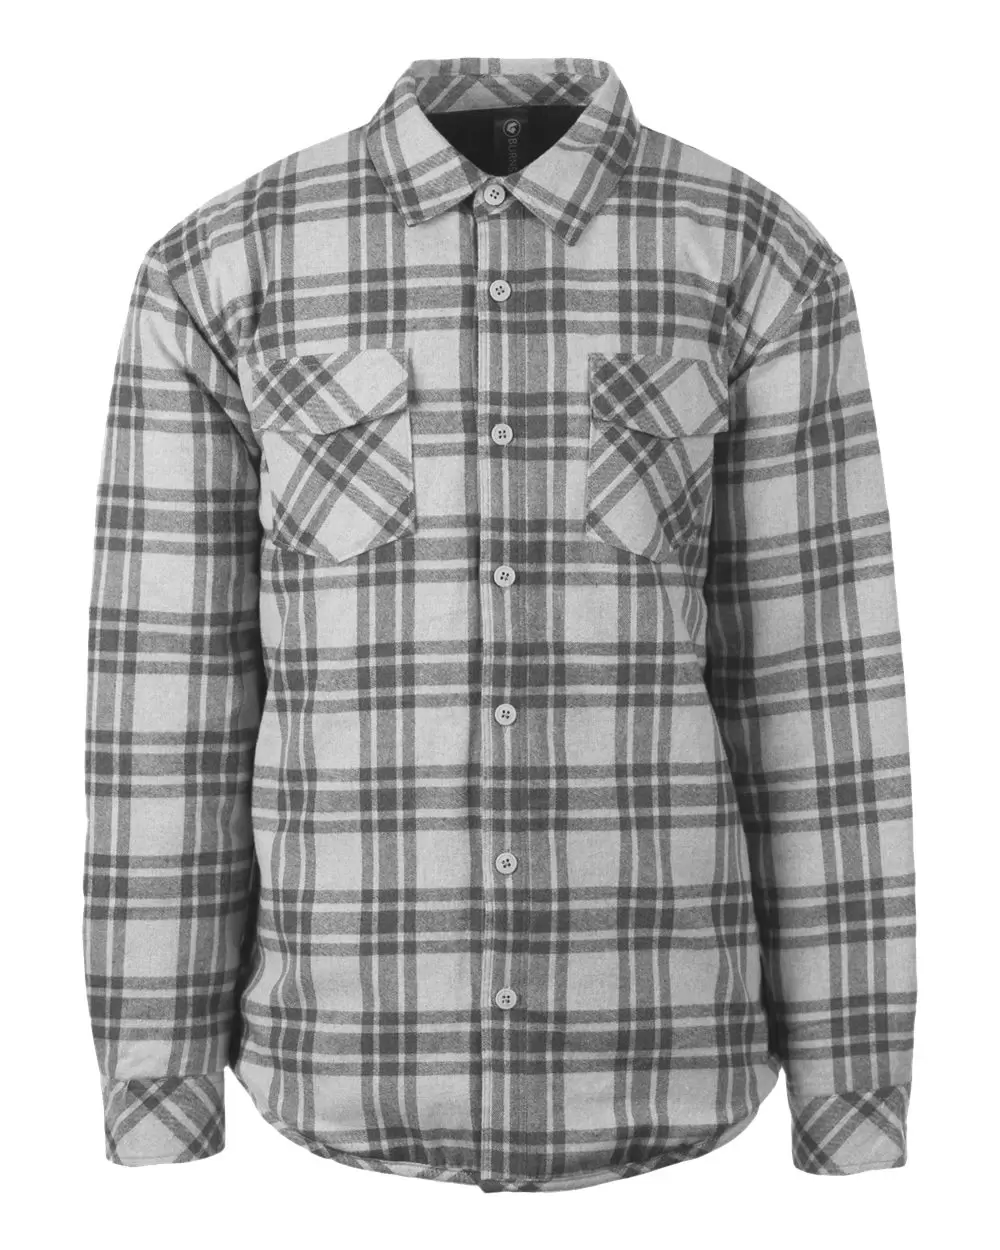 Burnside 8610 Quilted Flannel Jacket - From $30.34